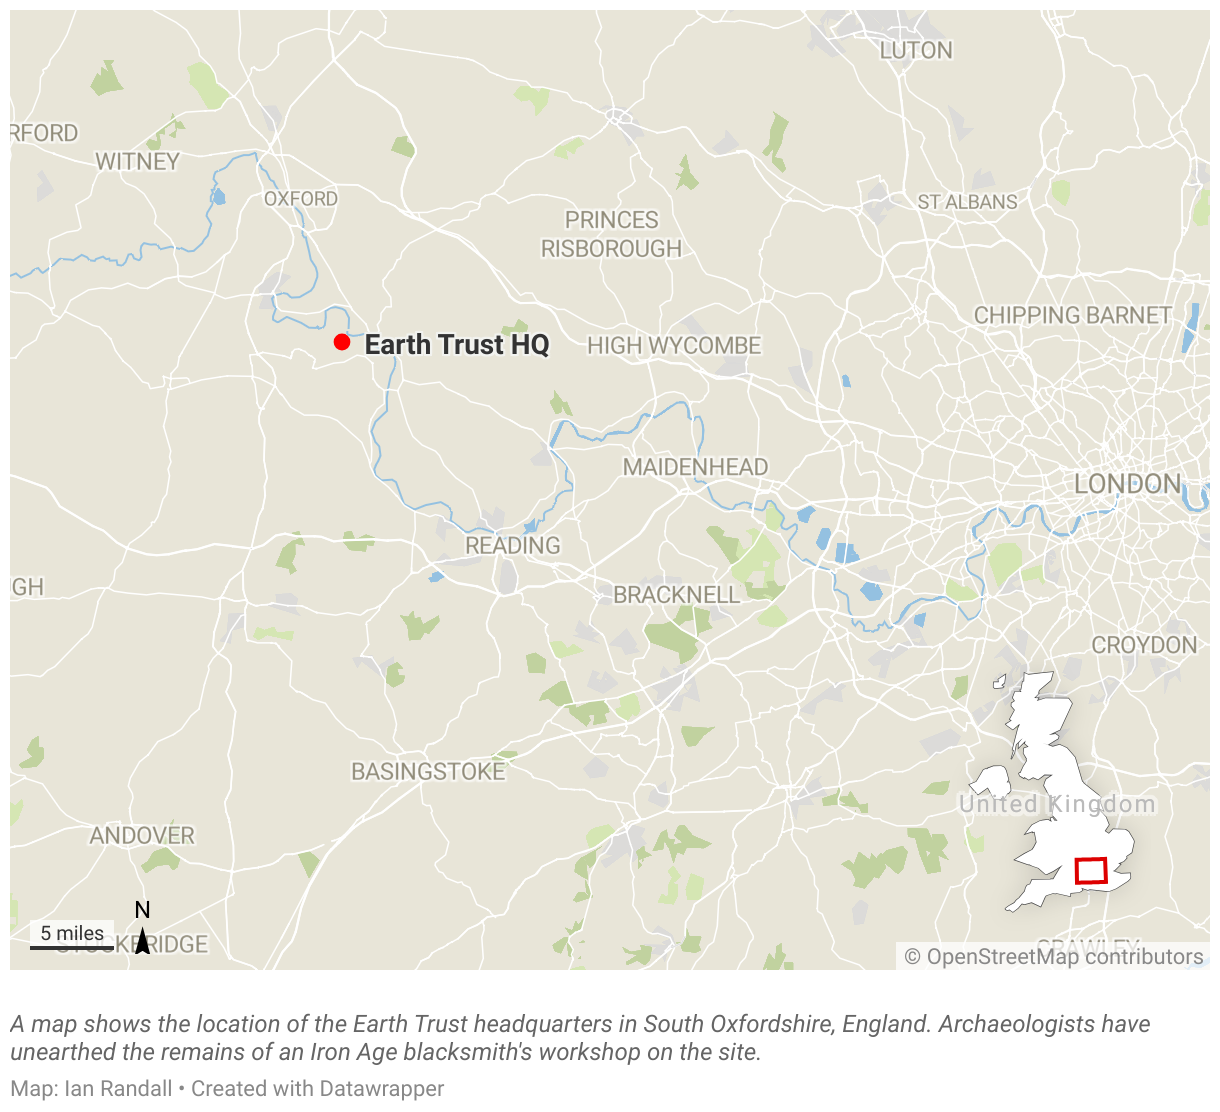 A map shows the location of the Earth Trust headquarters in South Oxfordshire, England.